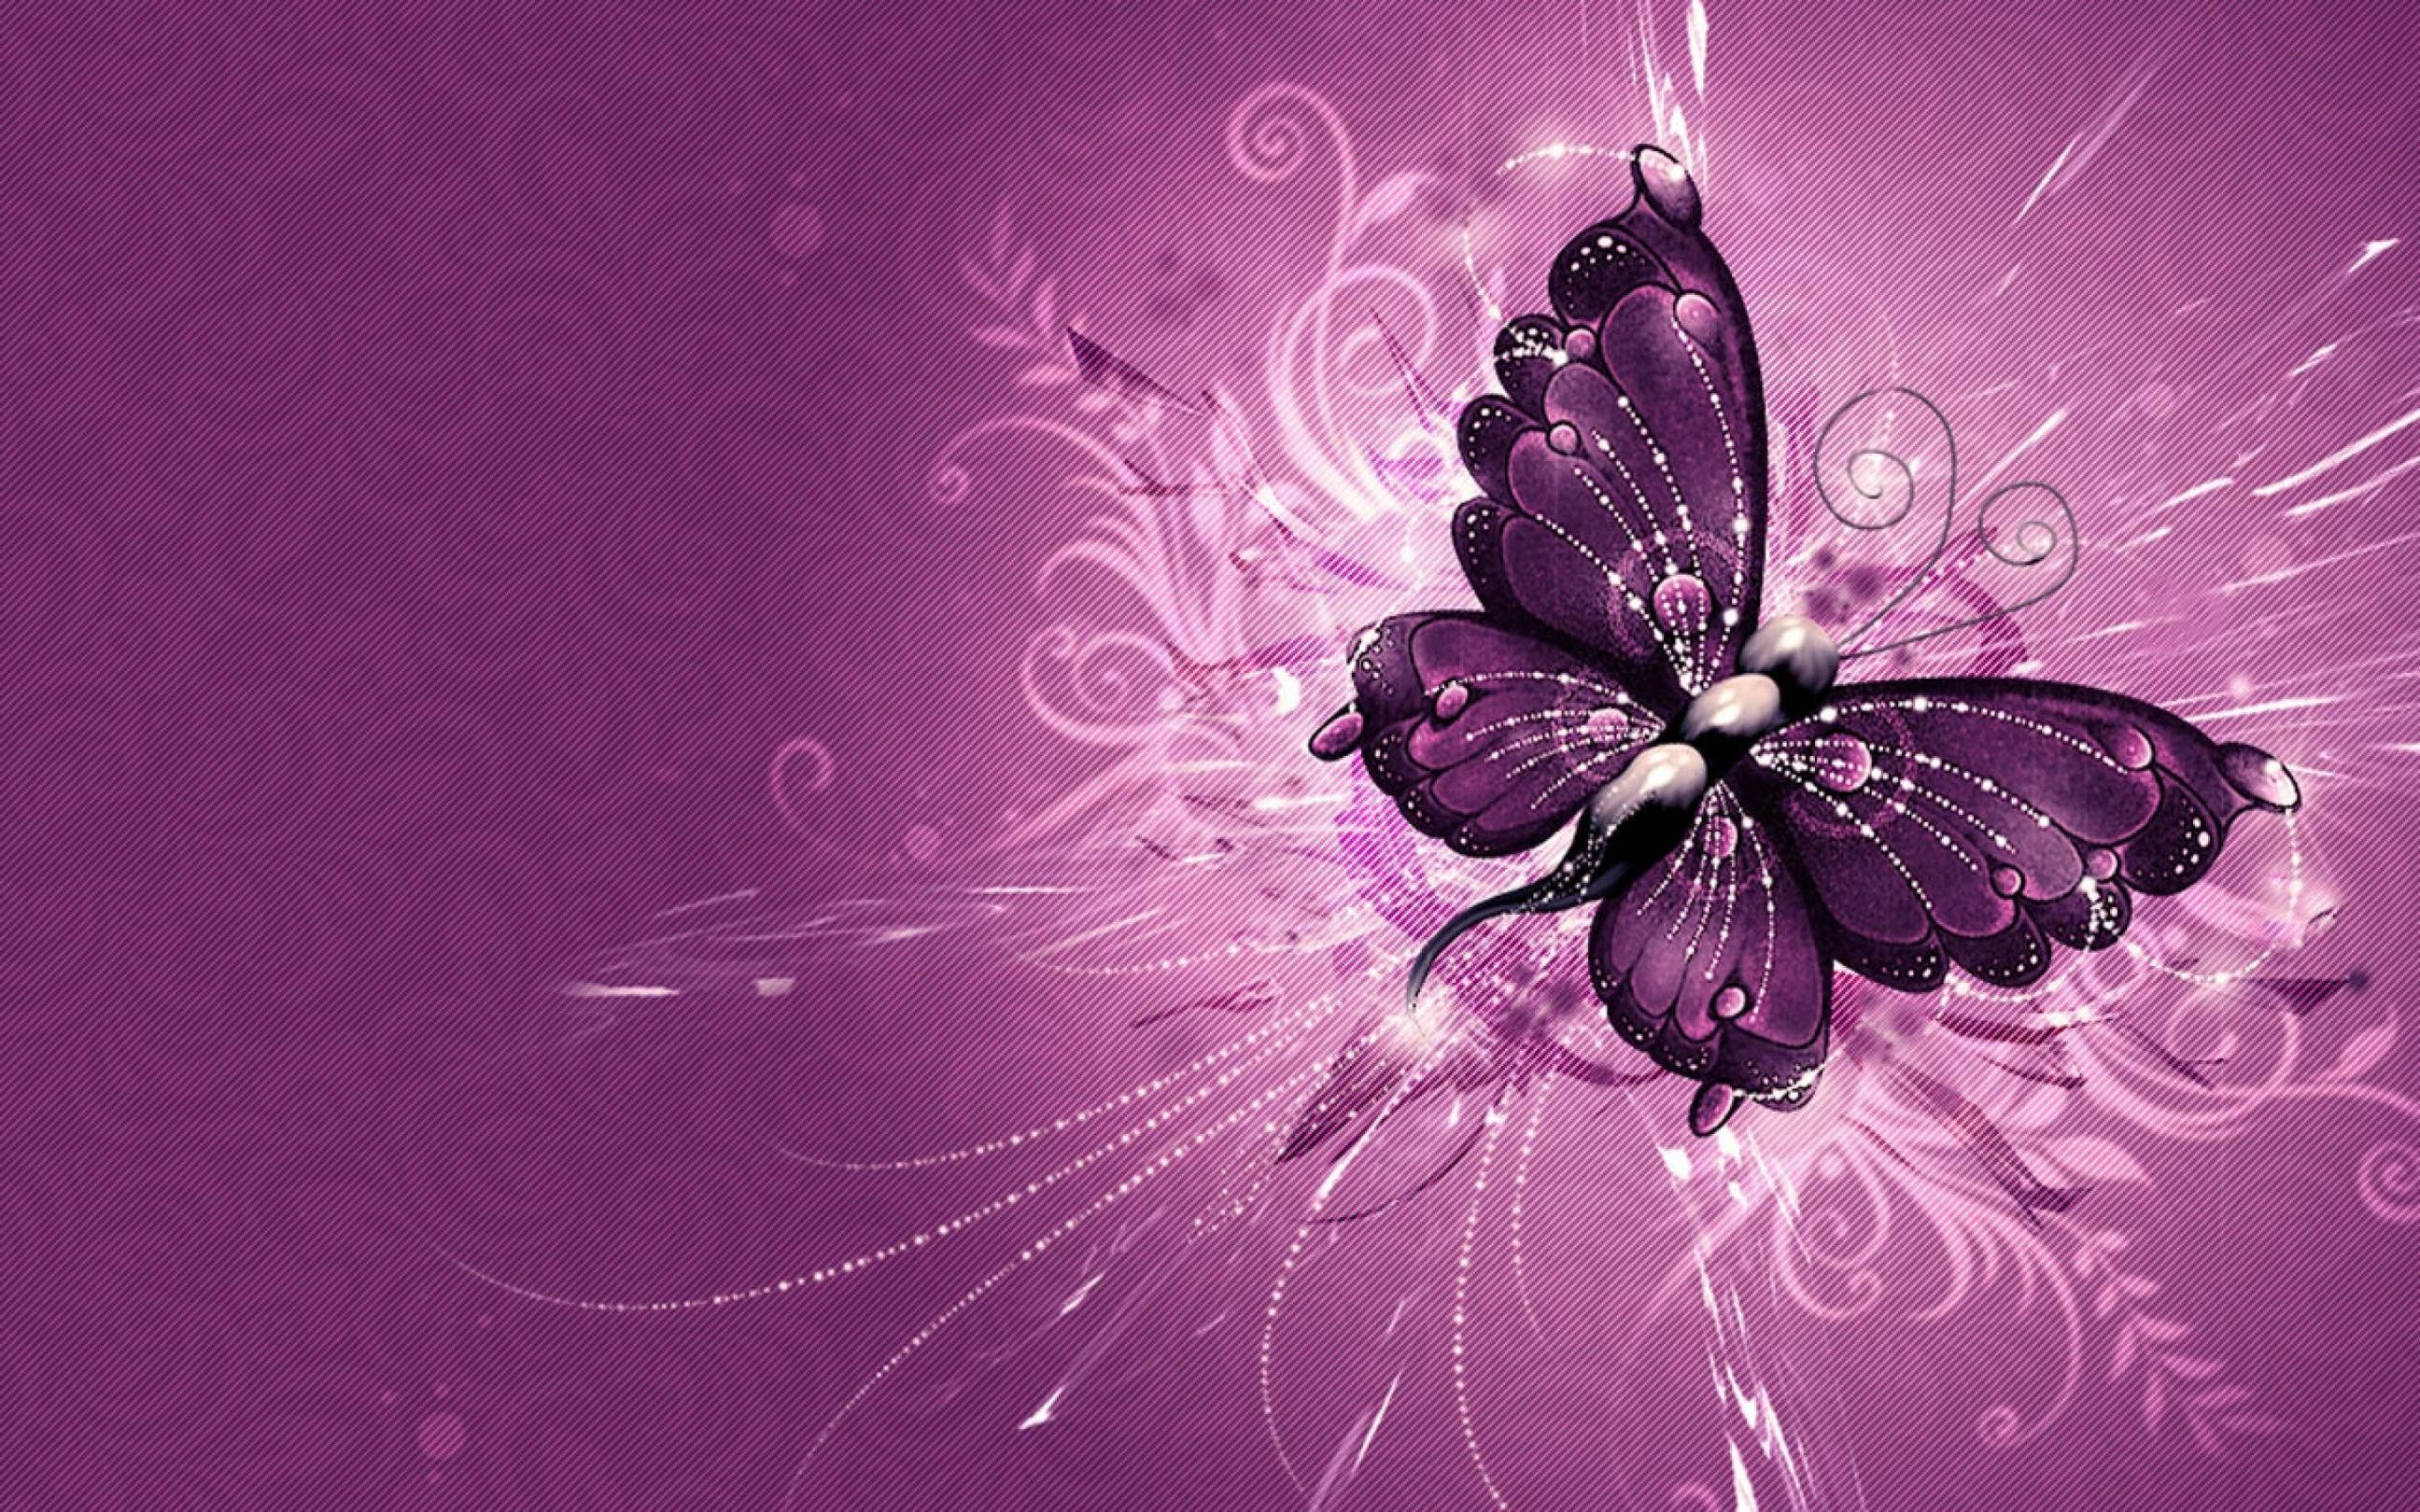 48446 Purple Butterfly Pattern Images Stock Photos  Vectors   Shutterstock